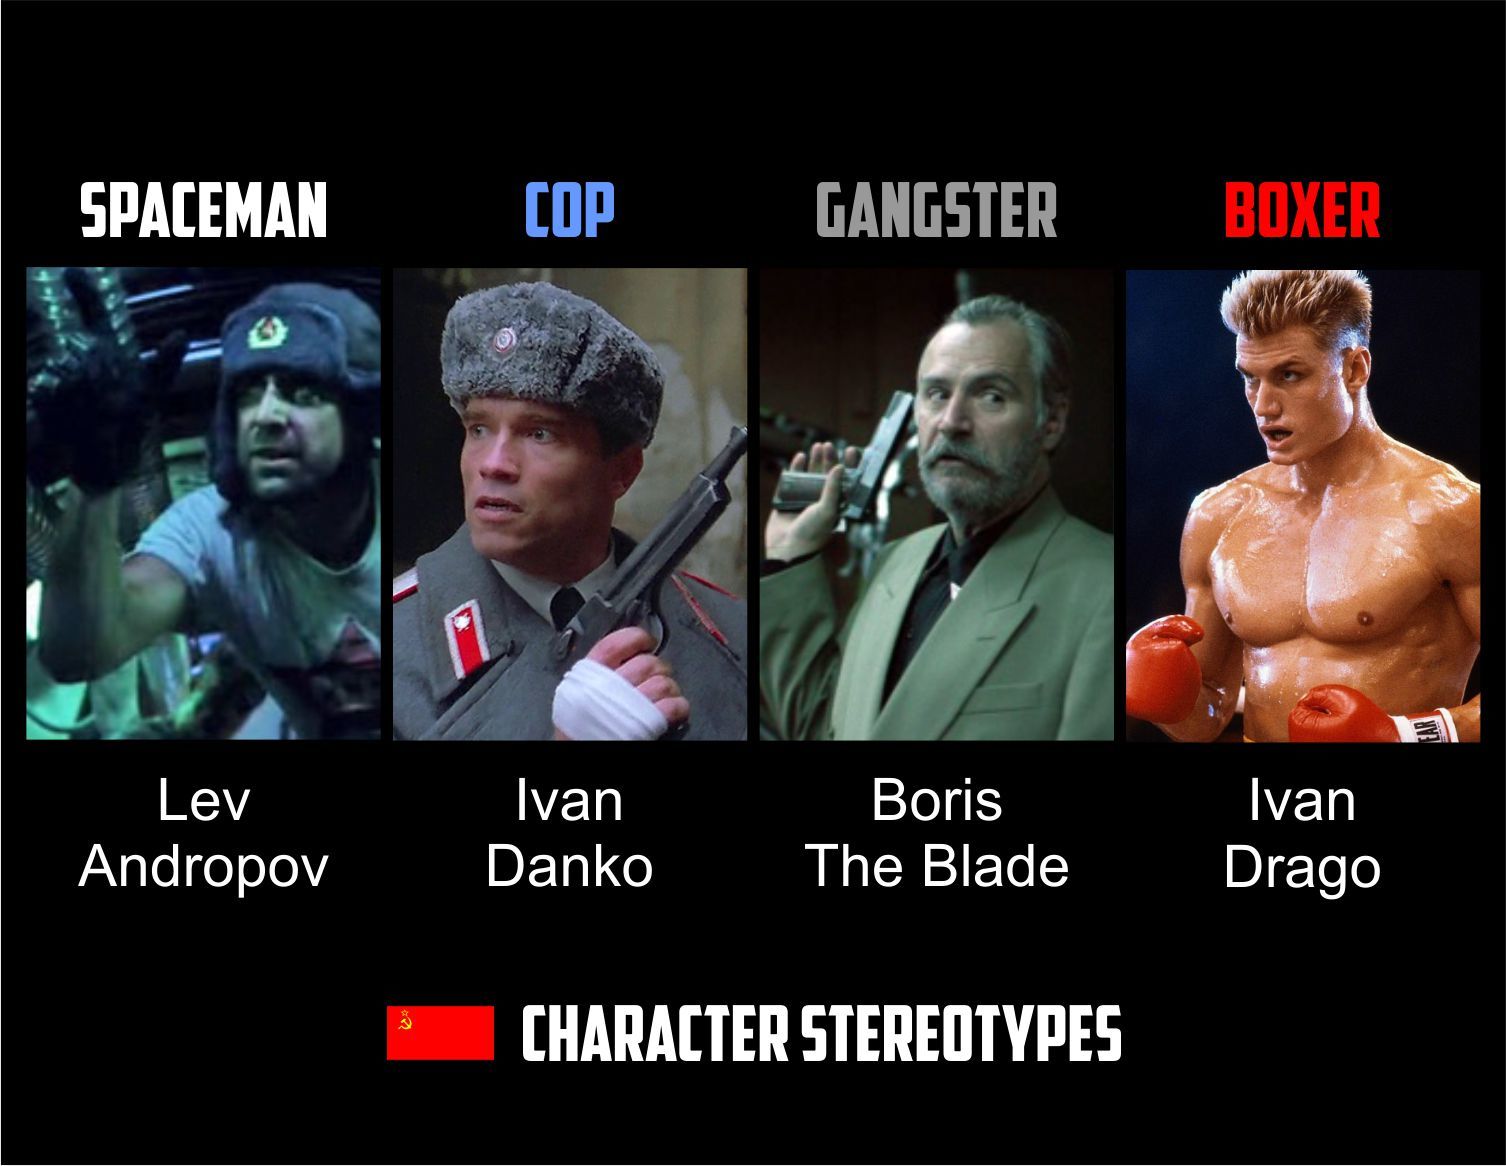 The canonical stereotypical characters we love so much. - My, Movies, Hollywood, Celebrities, Arnold Schwarzenegger, Dolph Lundgren